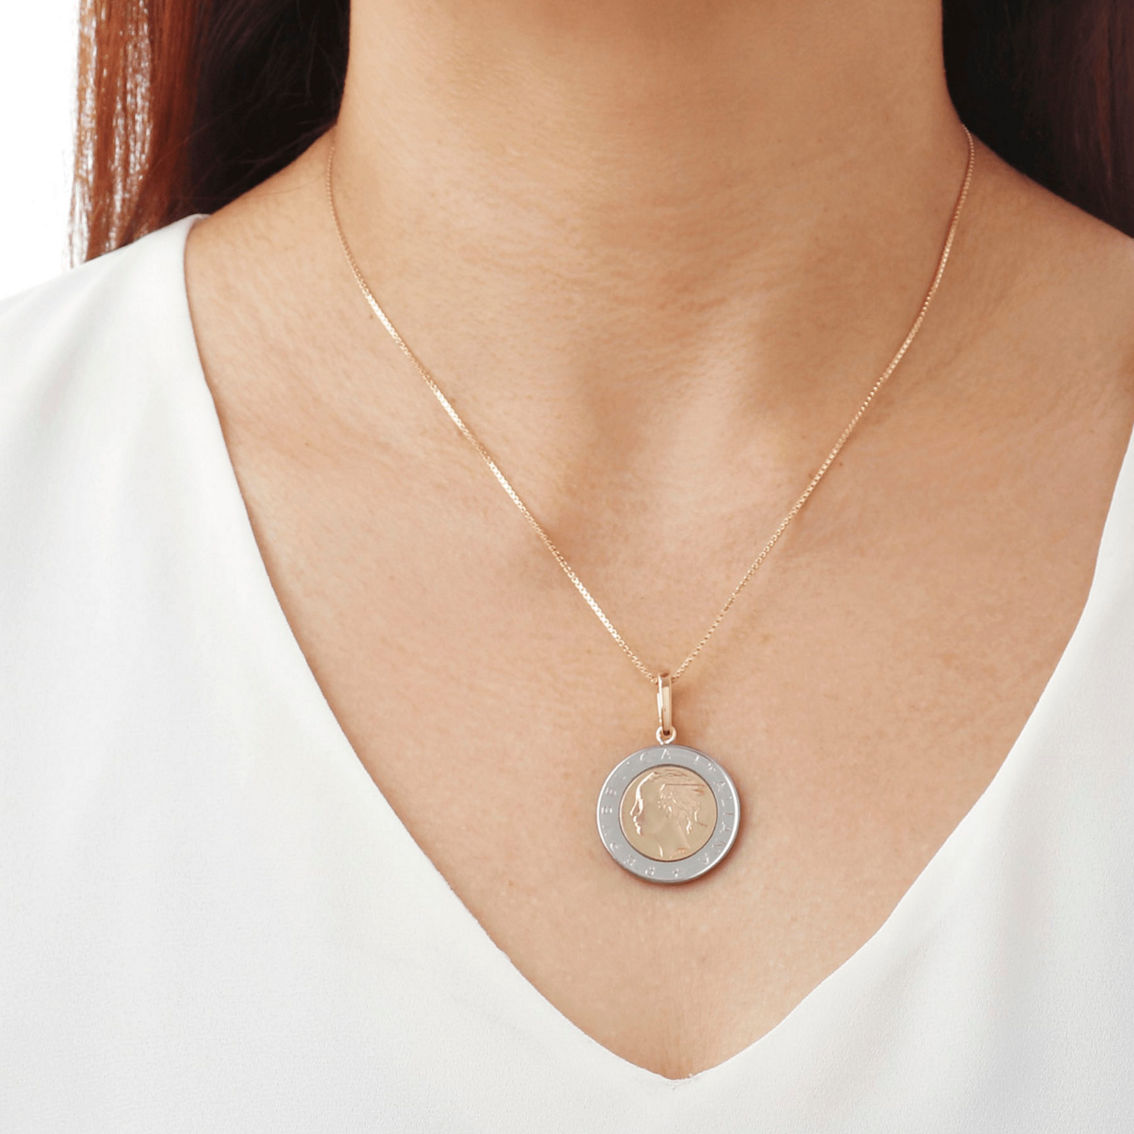 Milor 500 Lire Coin Pendant With Chain Necklace - Image 3 of 3